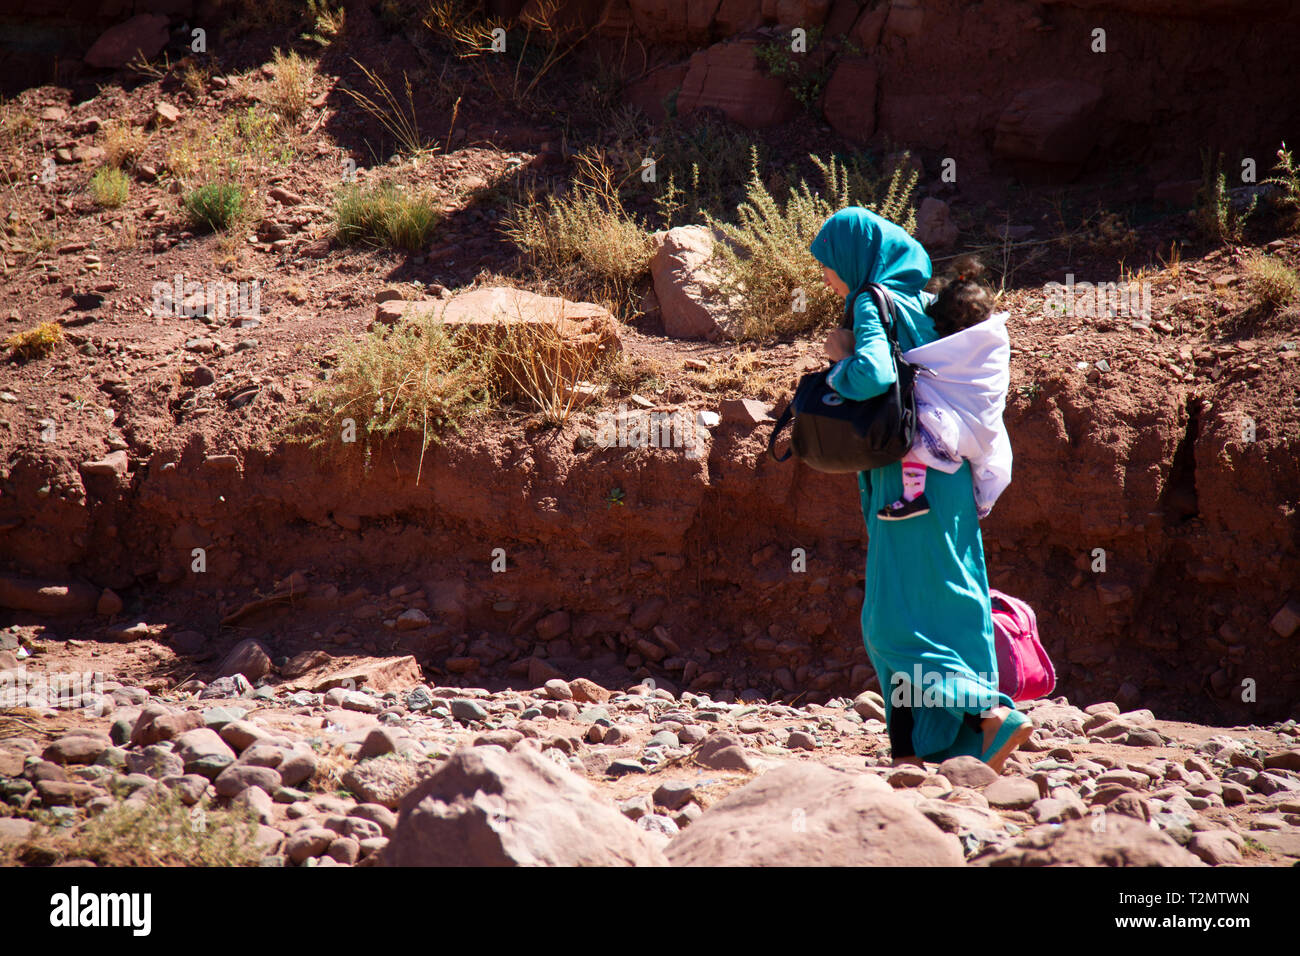 Morocco Local Bedouin Mother, in Turquoise Robe, Carrying Child on back Walking in Wadi near Telouet Kasbah Stock Photo